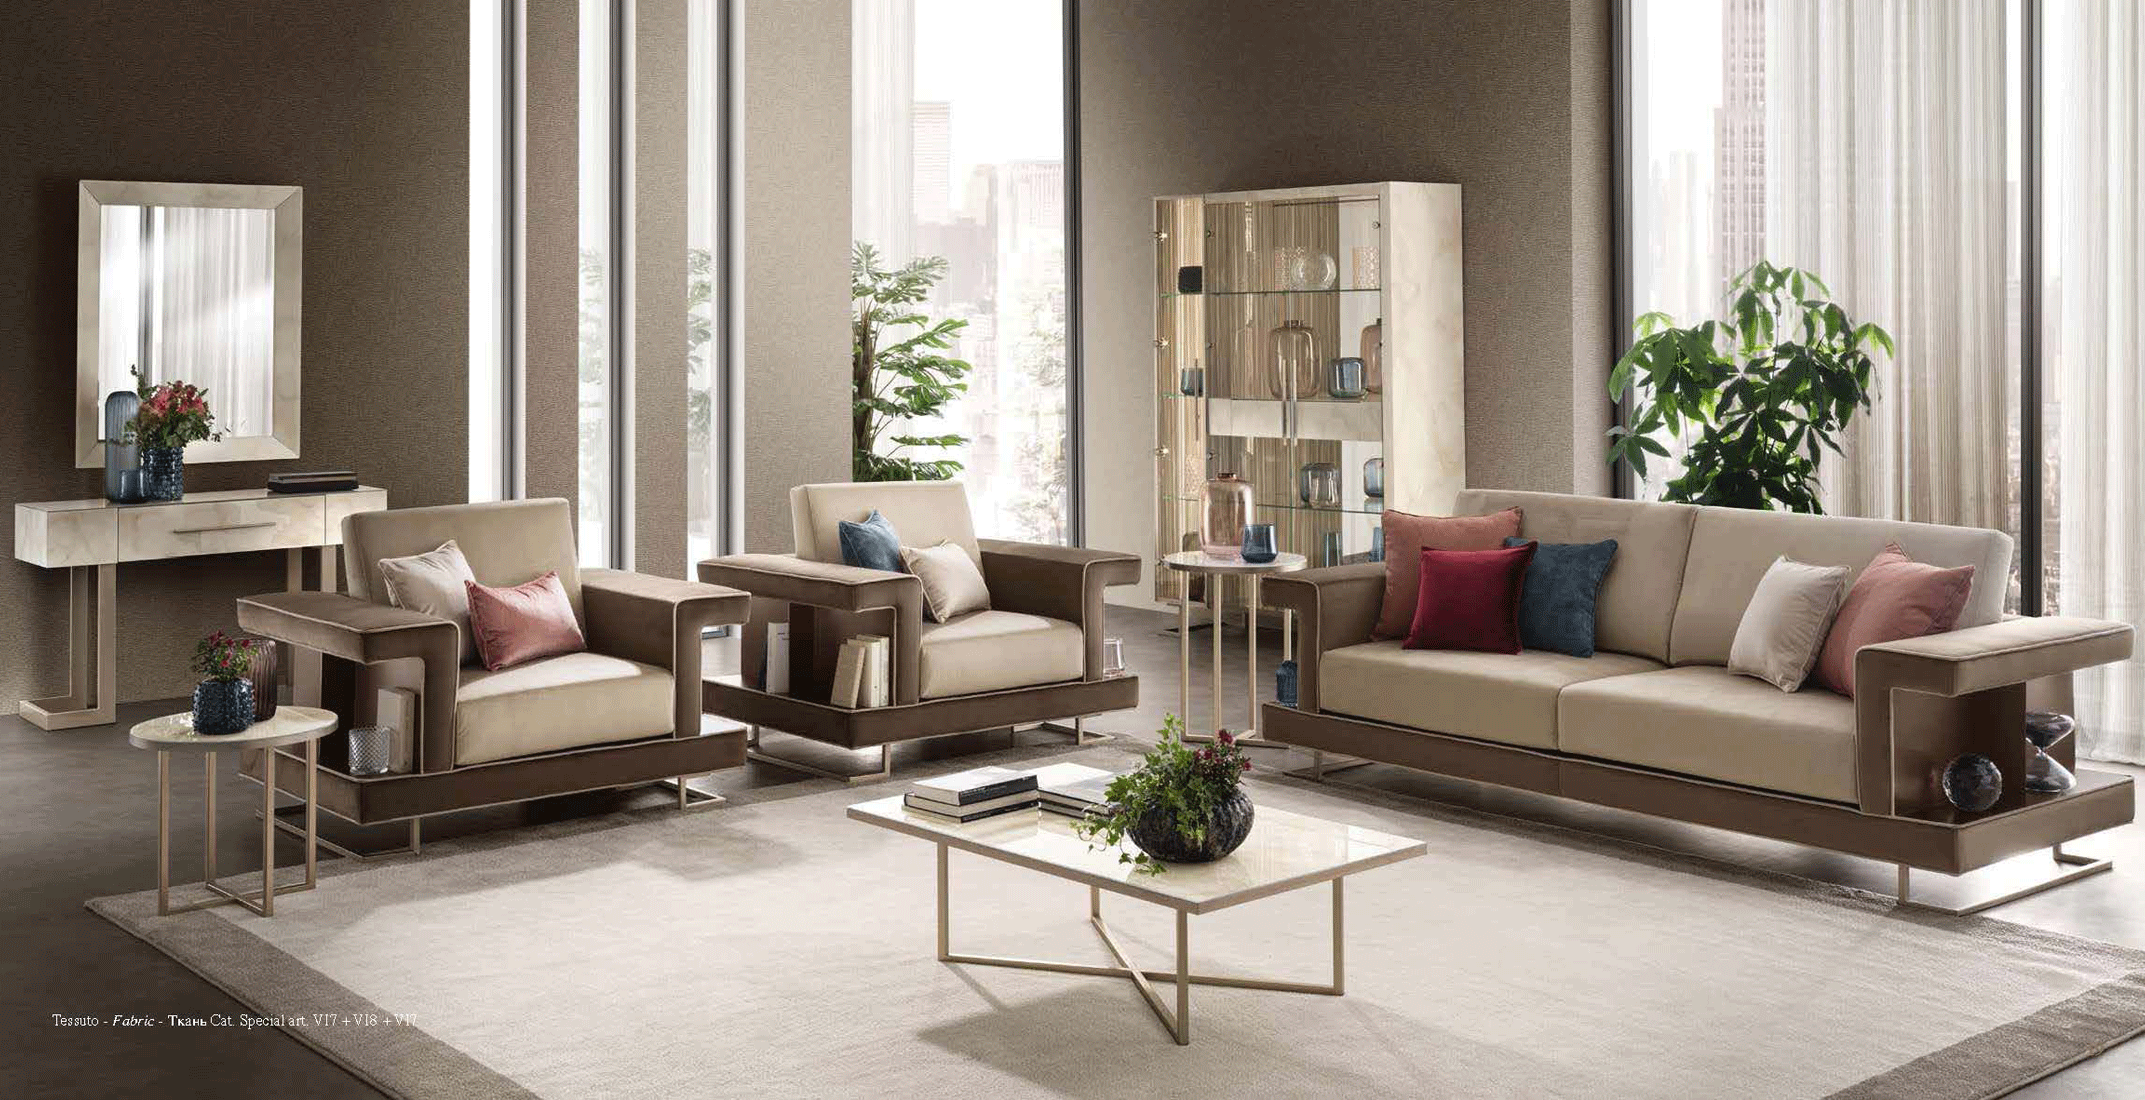 Living Room Furniture Sleepers Sofas Loveseats and Chairs Luce Light Living by Arredoclassic, Italy